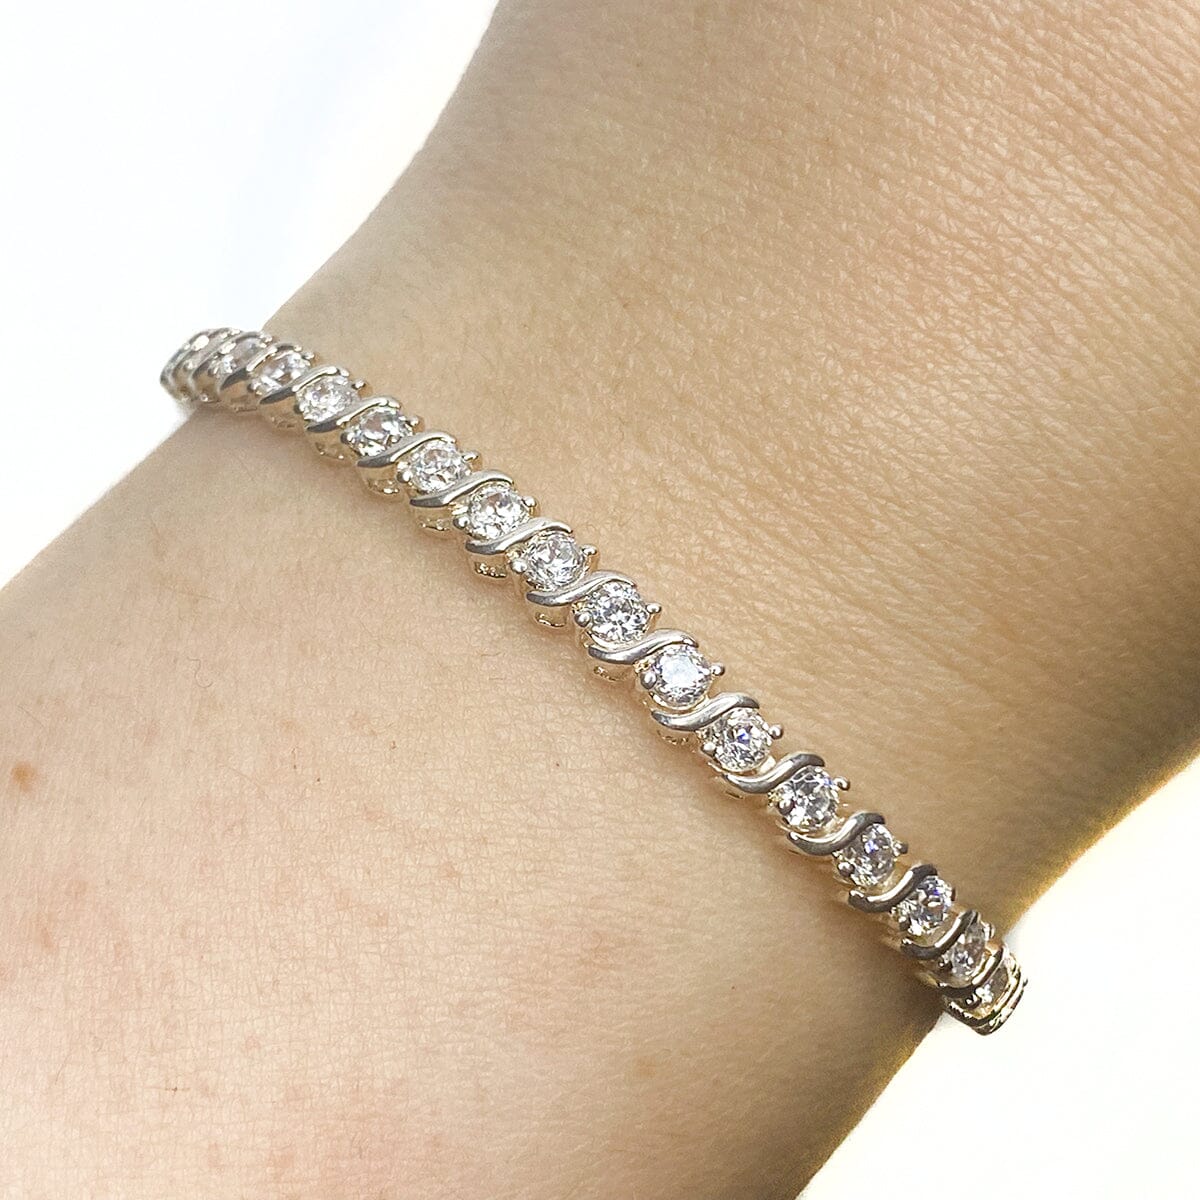 Great Lakes Boutique Silver and Cubic Zirconia Tennis Bracelet